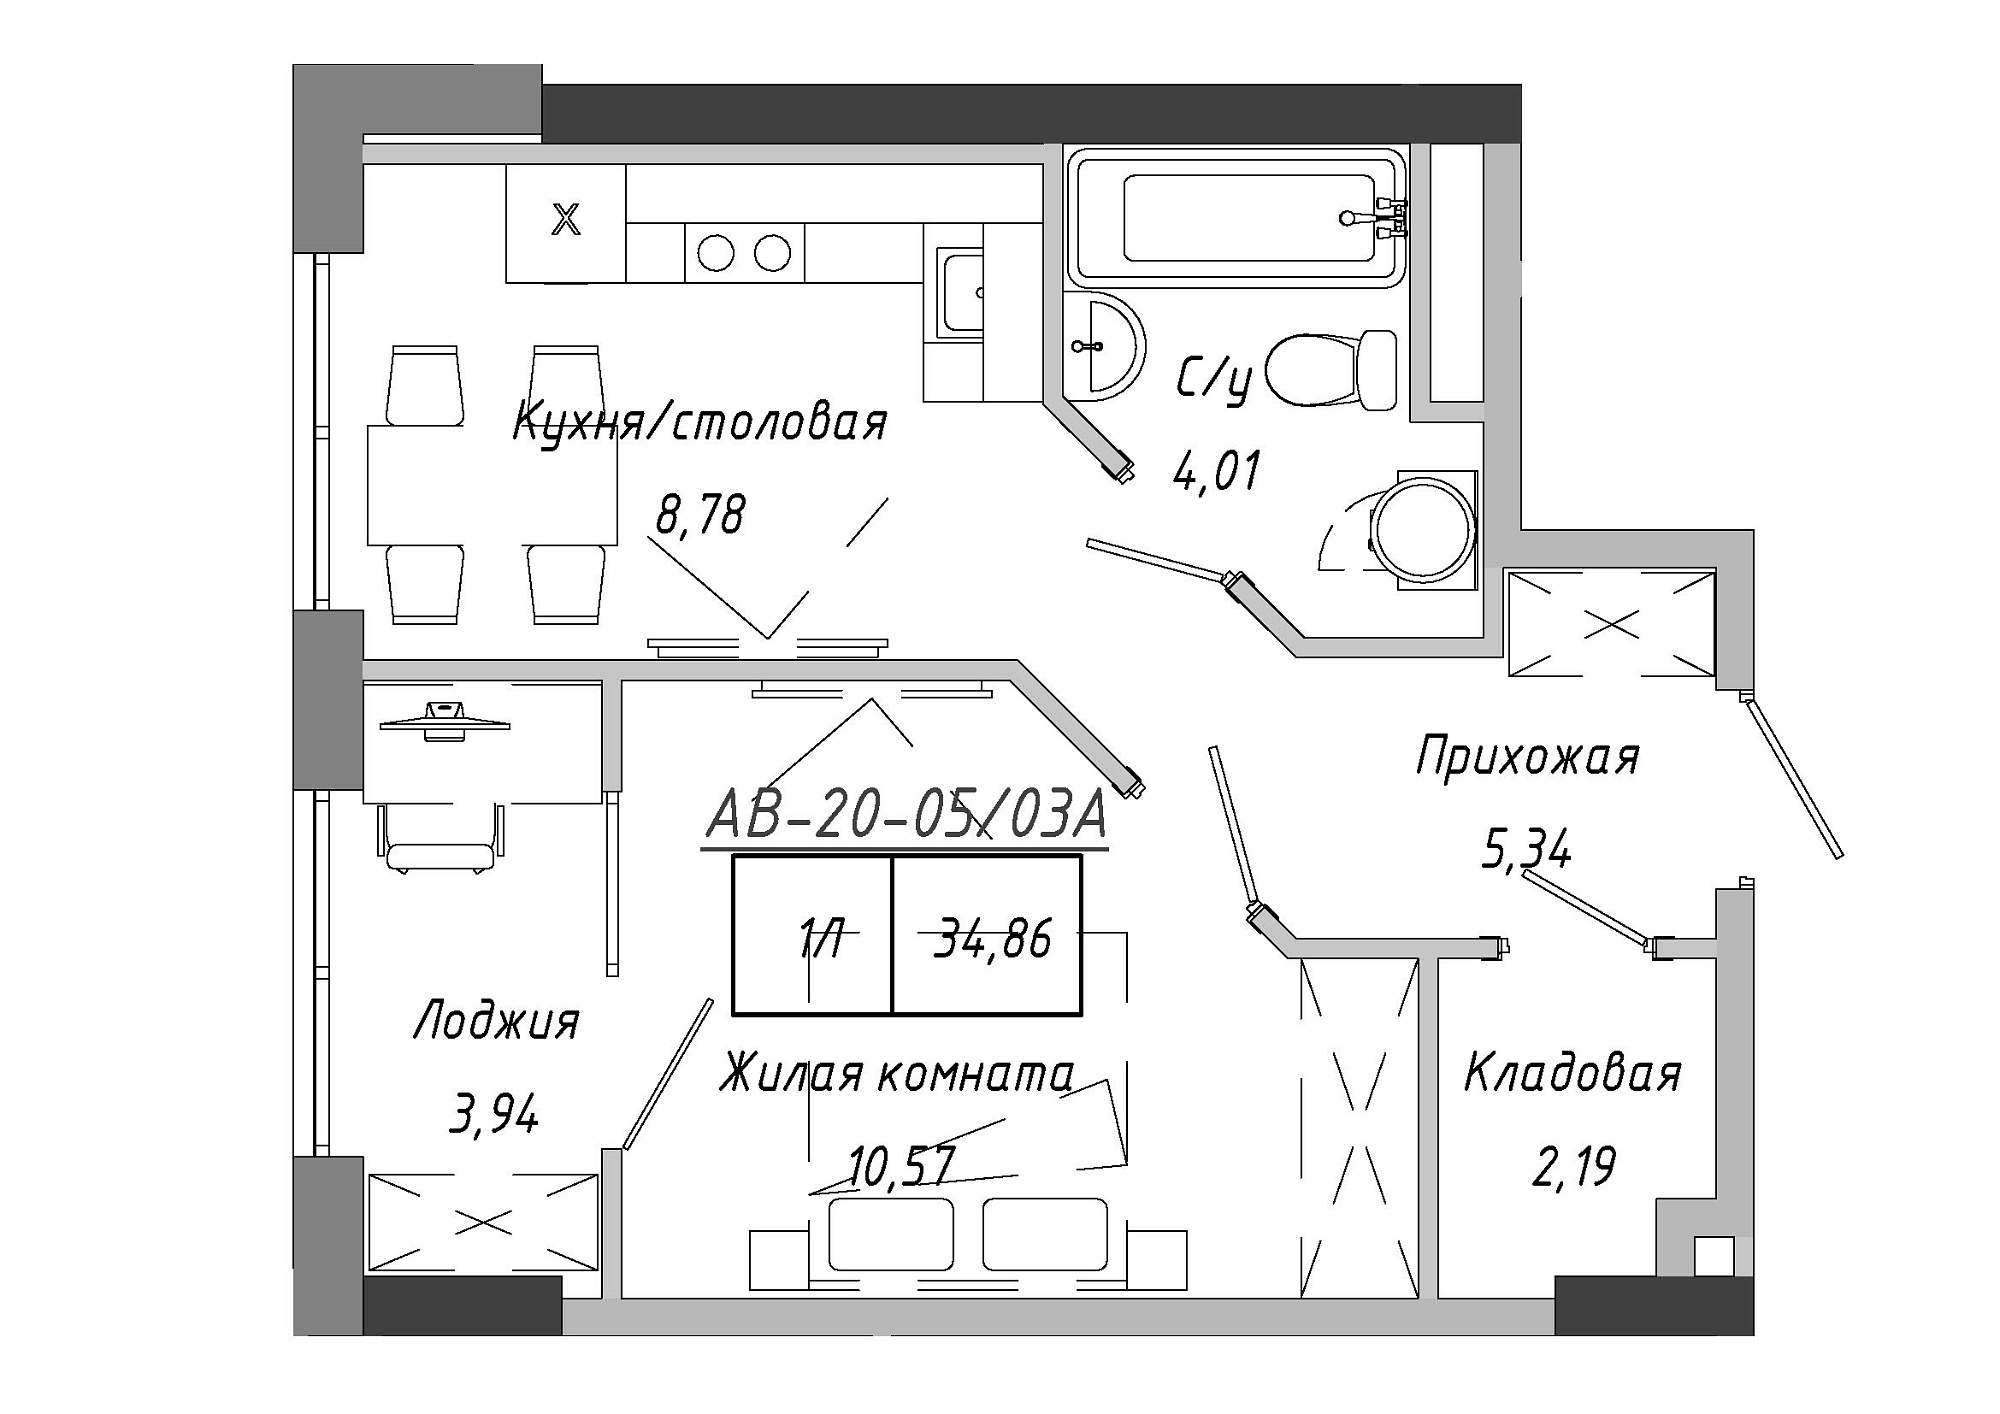 Planning 1-rm flats area 35.26m2, AB-20-05/0003а.